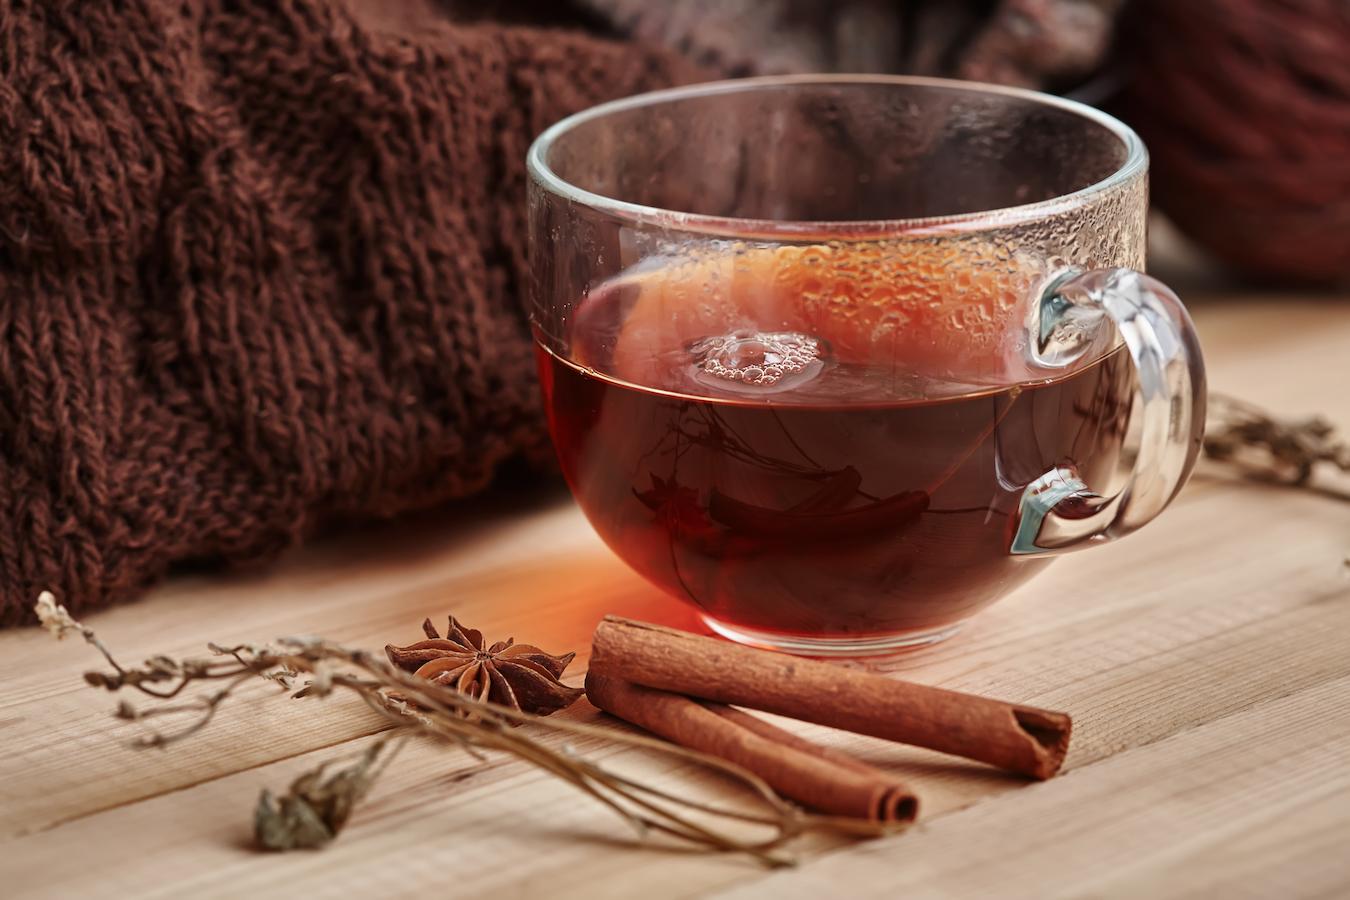 What Are The Benefits Of Cinnamon Tea